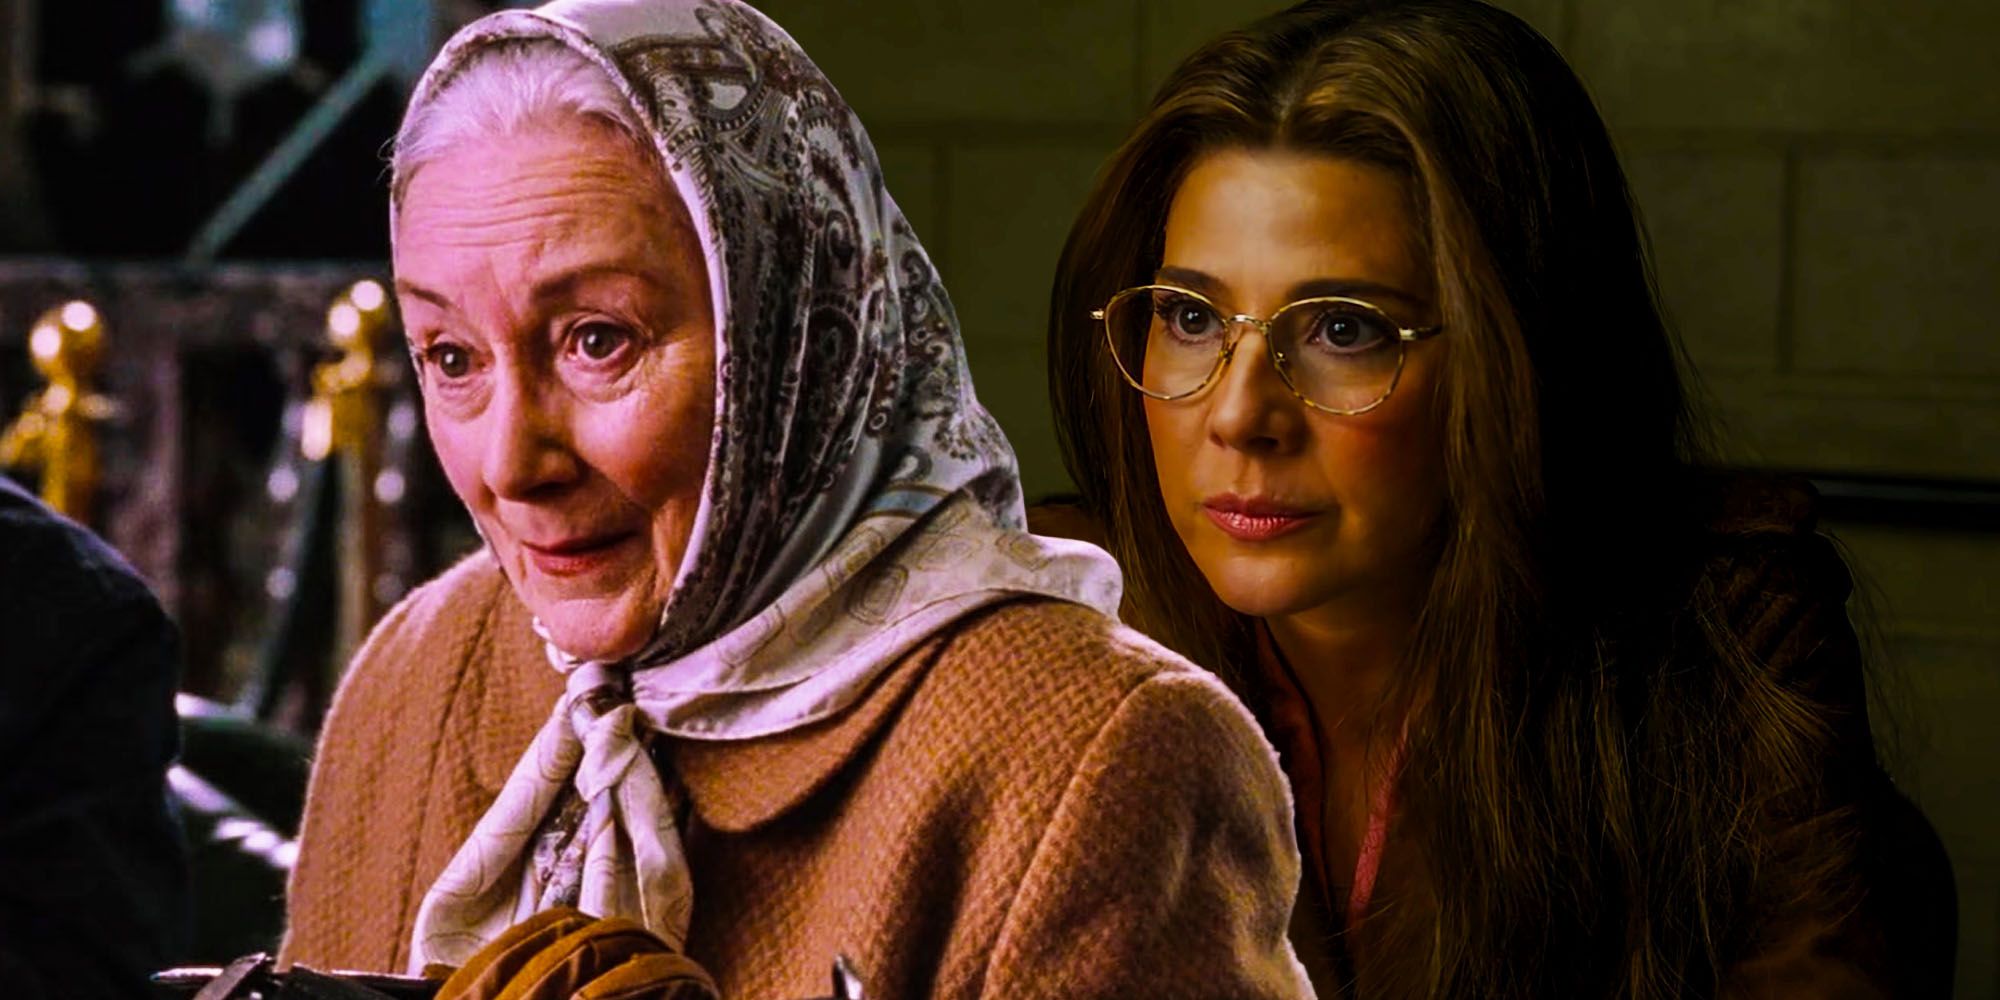 Aunt may